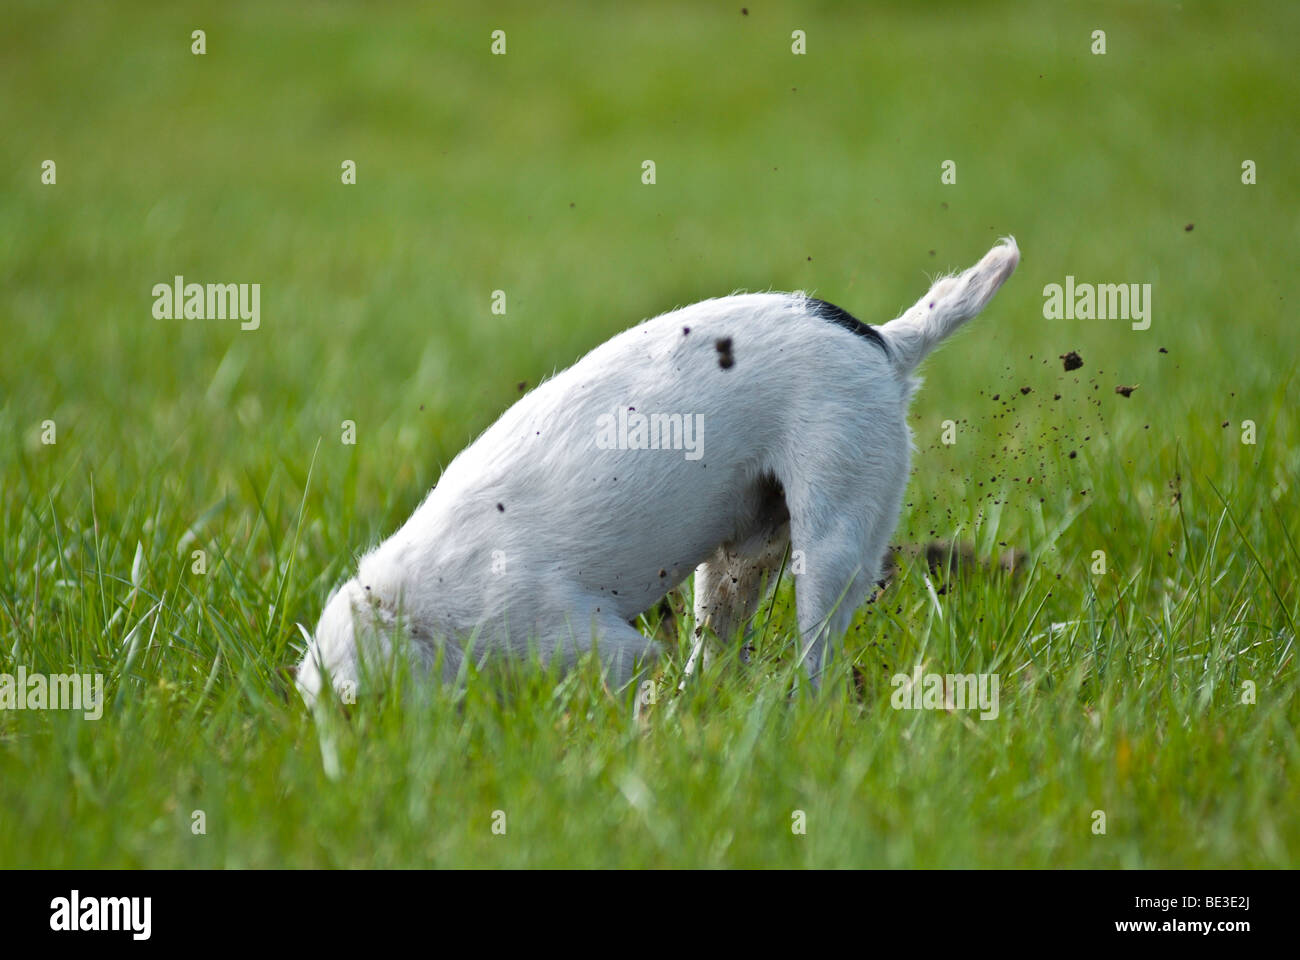 Jack Russell Terrier digging in a lawn Stock Photo